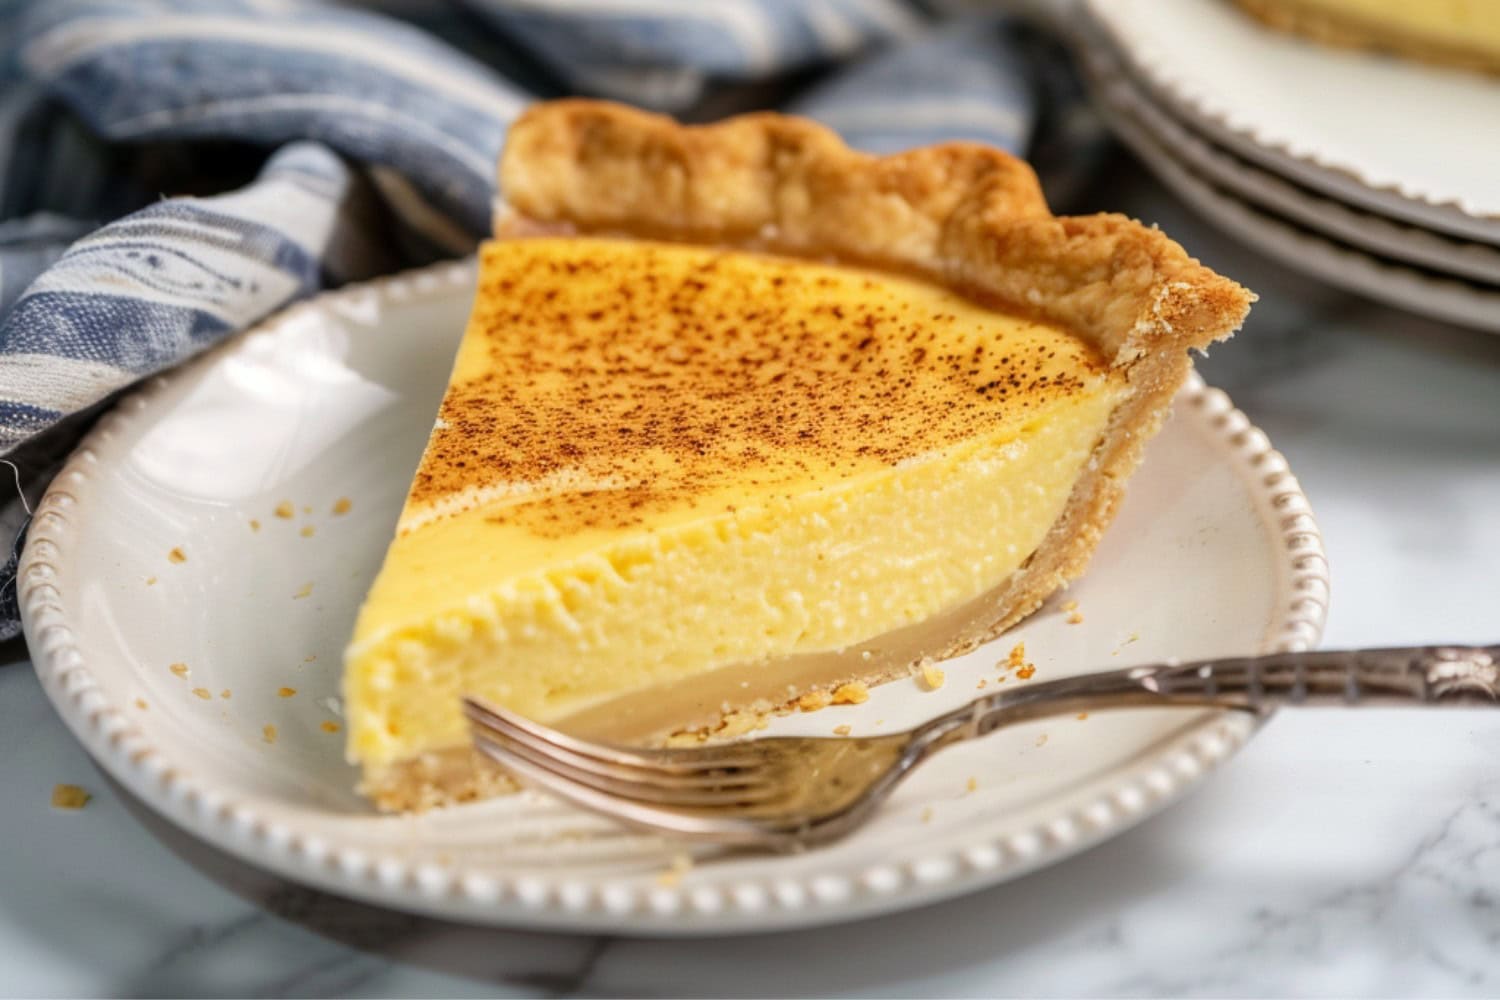 A delightful slice of custard pie topped with ground nutmeg